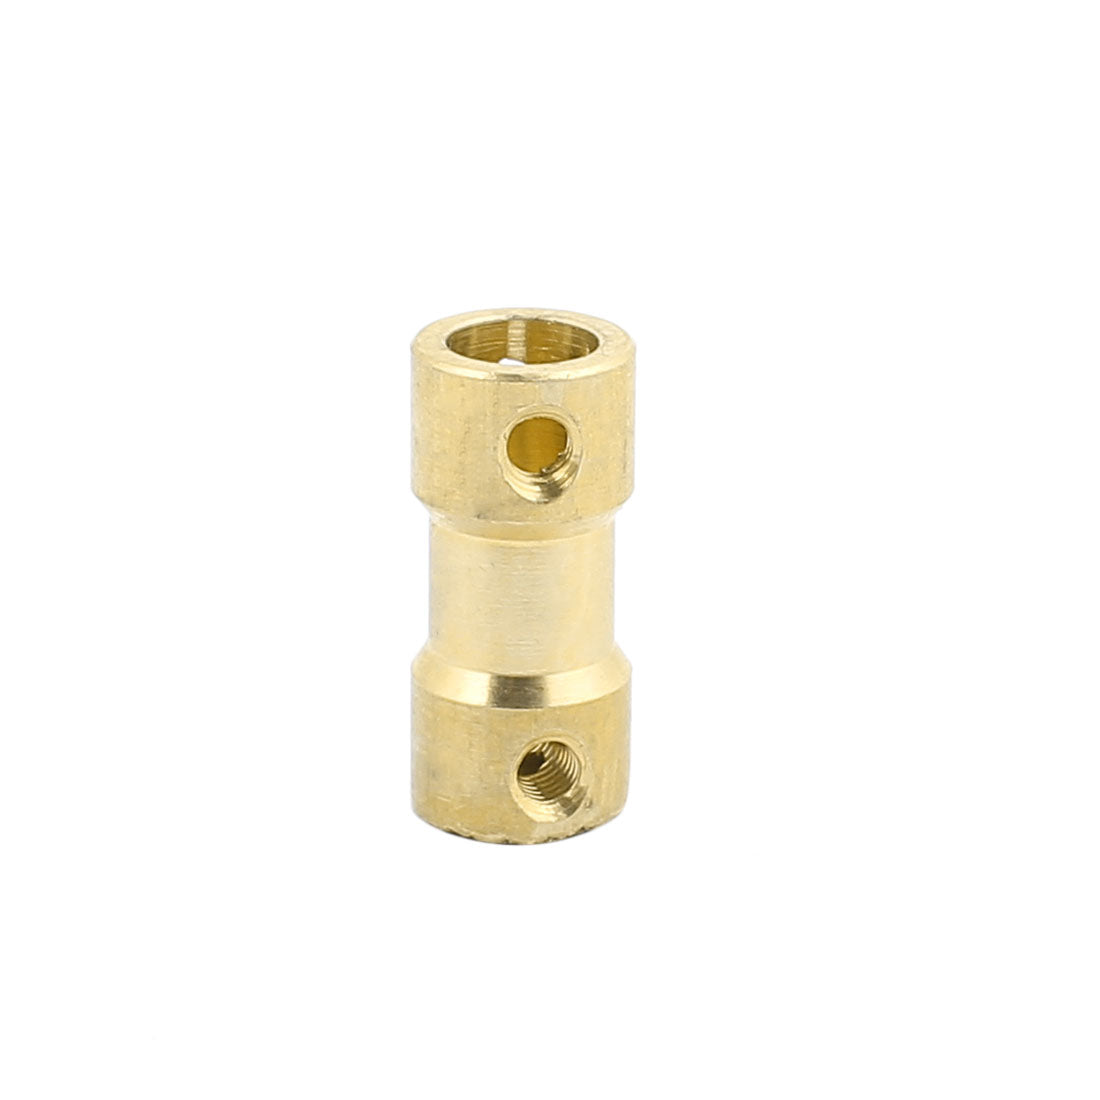 Uxcell Uxcell 2.3mmx2.3mm Brass Shaft Coupling Coupler Motor Transmission Motor Connector for RC Boat Model